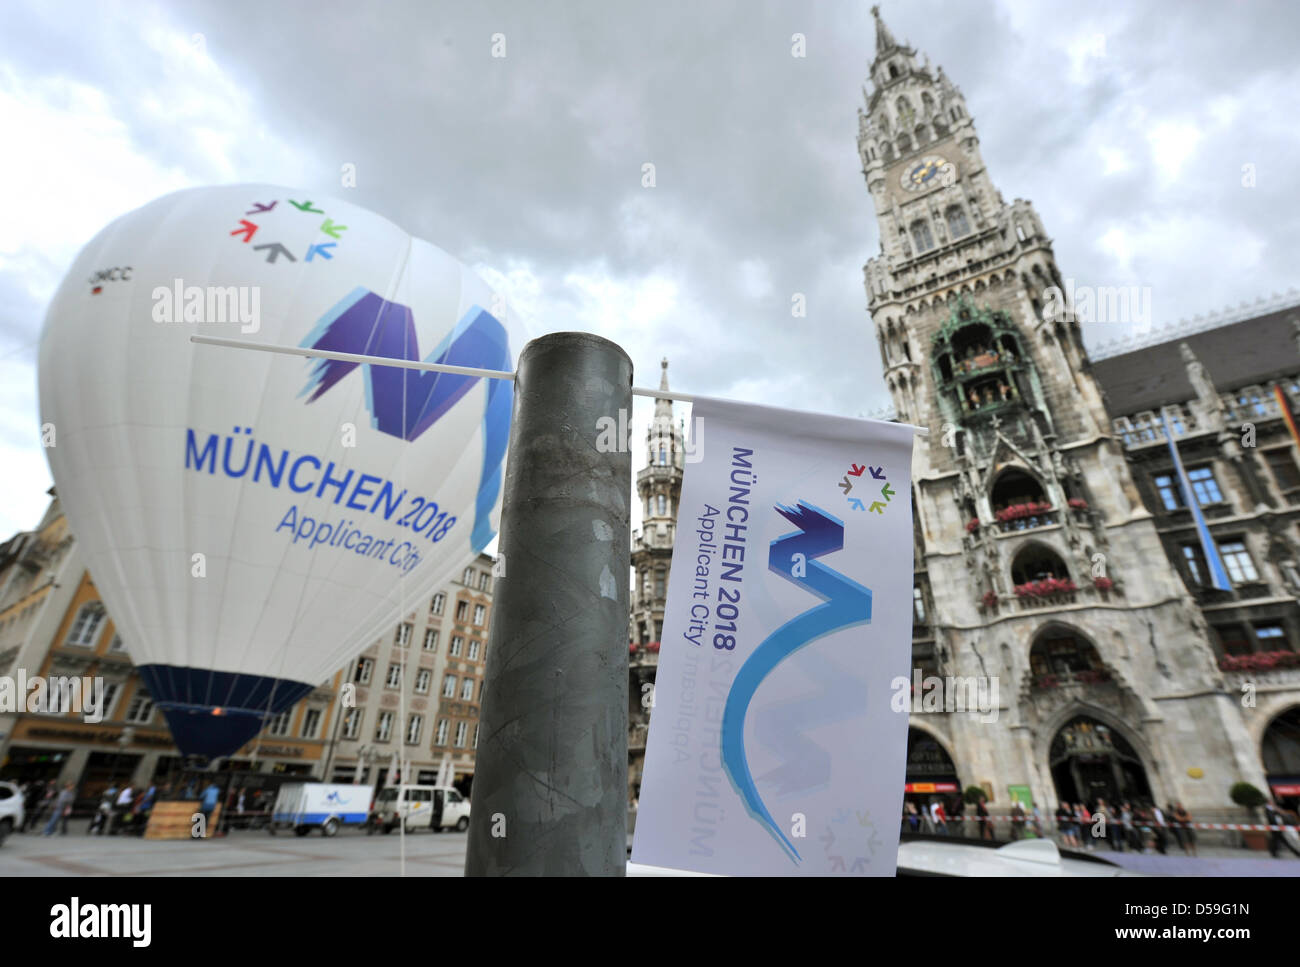 A hot air balloon and a flag bearing the inscription 'Munich 20189 - Applicant City' can be seen at a public soccer viewing event at the Marienplatz in the centre of Munich (Upper Bavaria), Germany, 22 June 2010. A tower of the Munich Town Hall is visible in the background. The occasion for the celebration is the Lausanne-based Olympic Committee's (IOC) decision to nominate Munich  Stock Photo